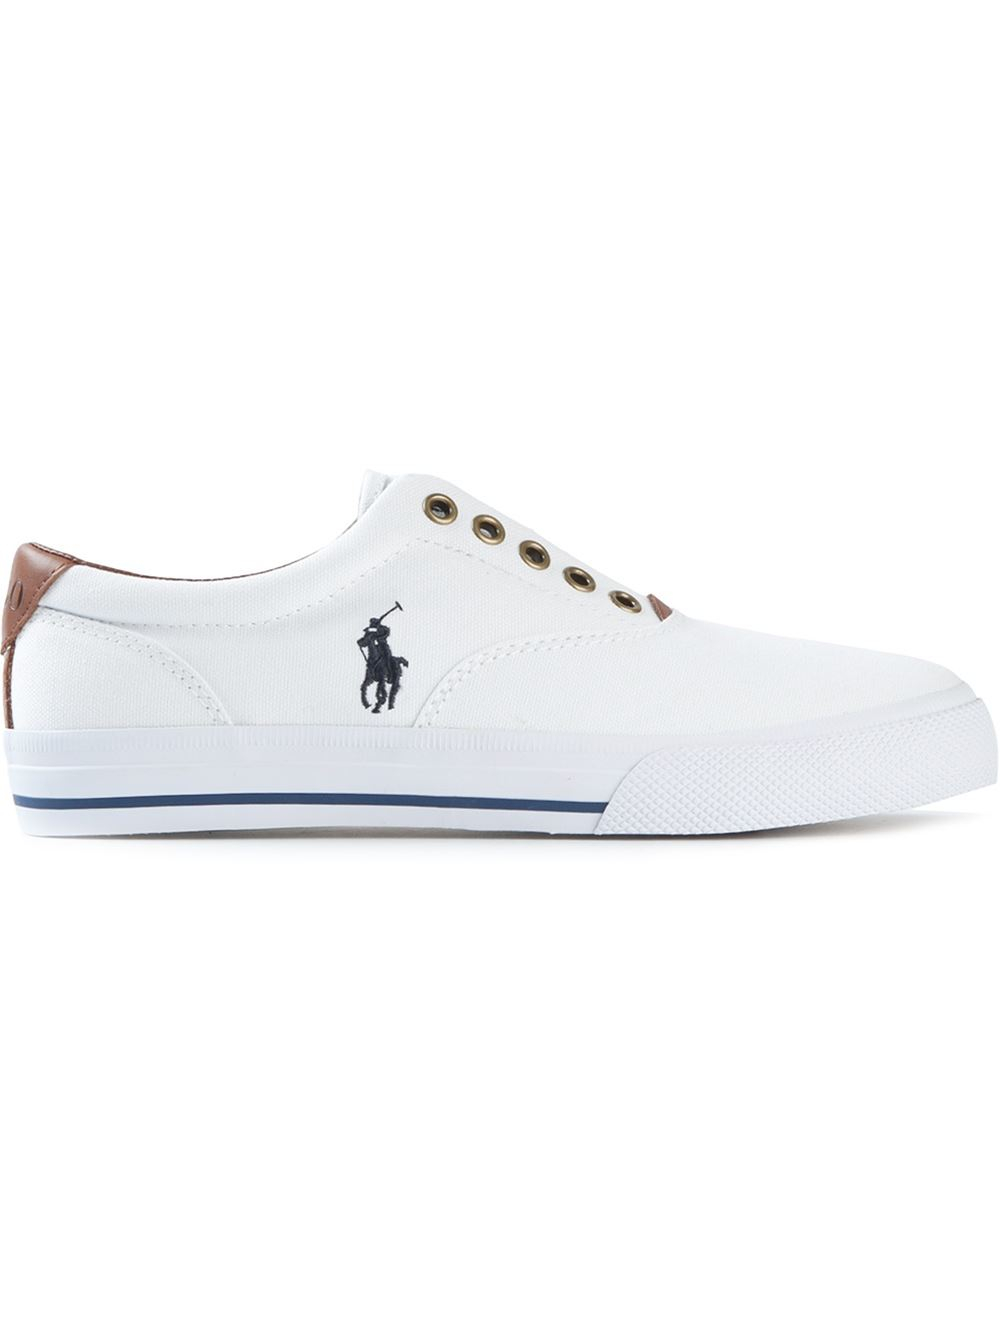 Polo ralph lauren Logo Embroidered Laceless Sneakers in White for Men ...